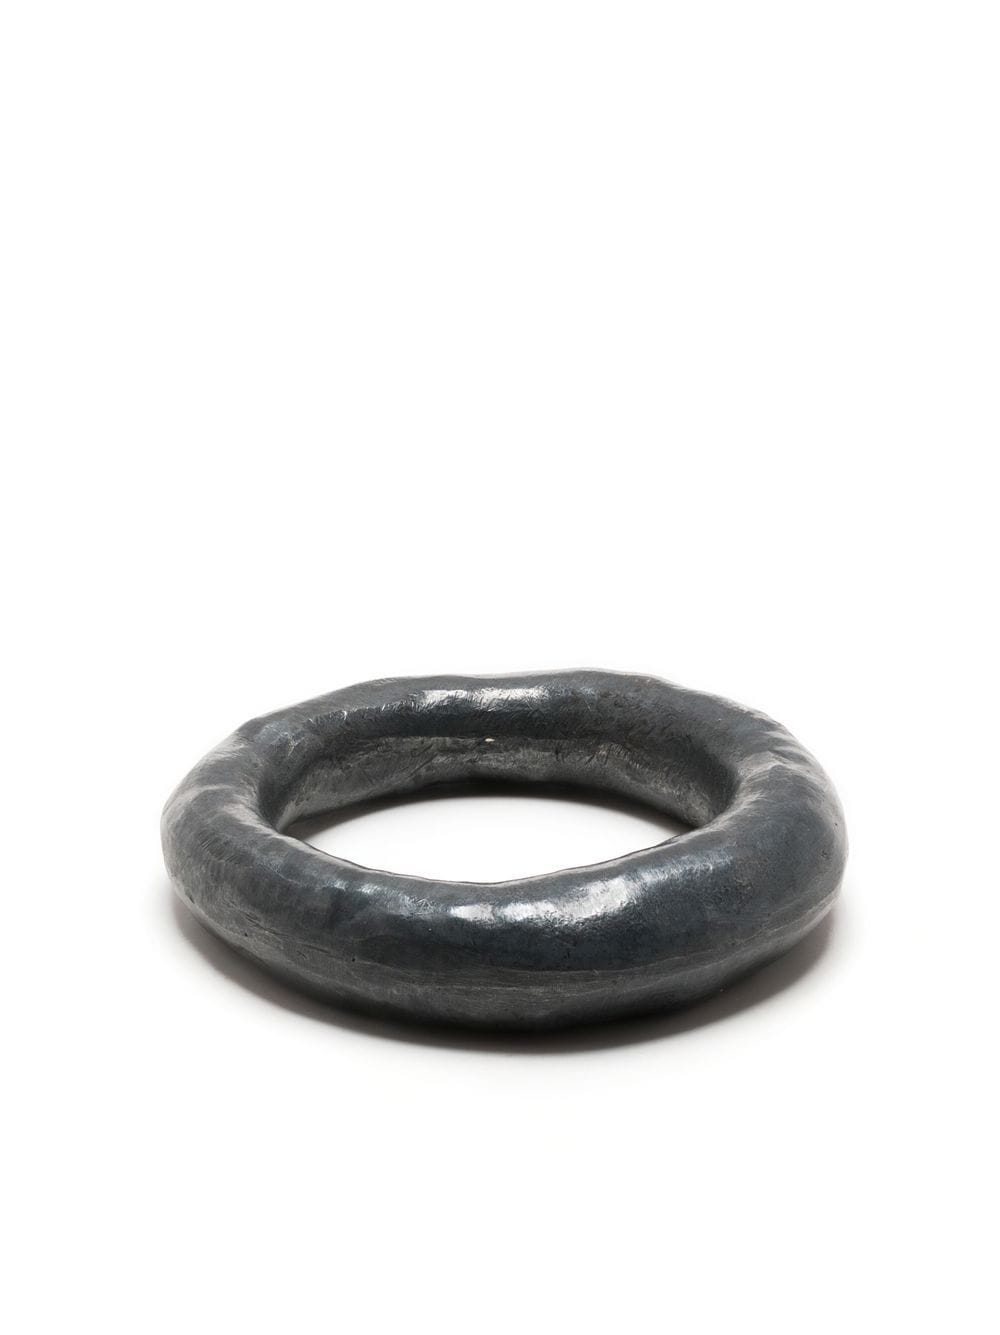 Parts of Four Spacer hammered ring - Black von Parts of Four